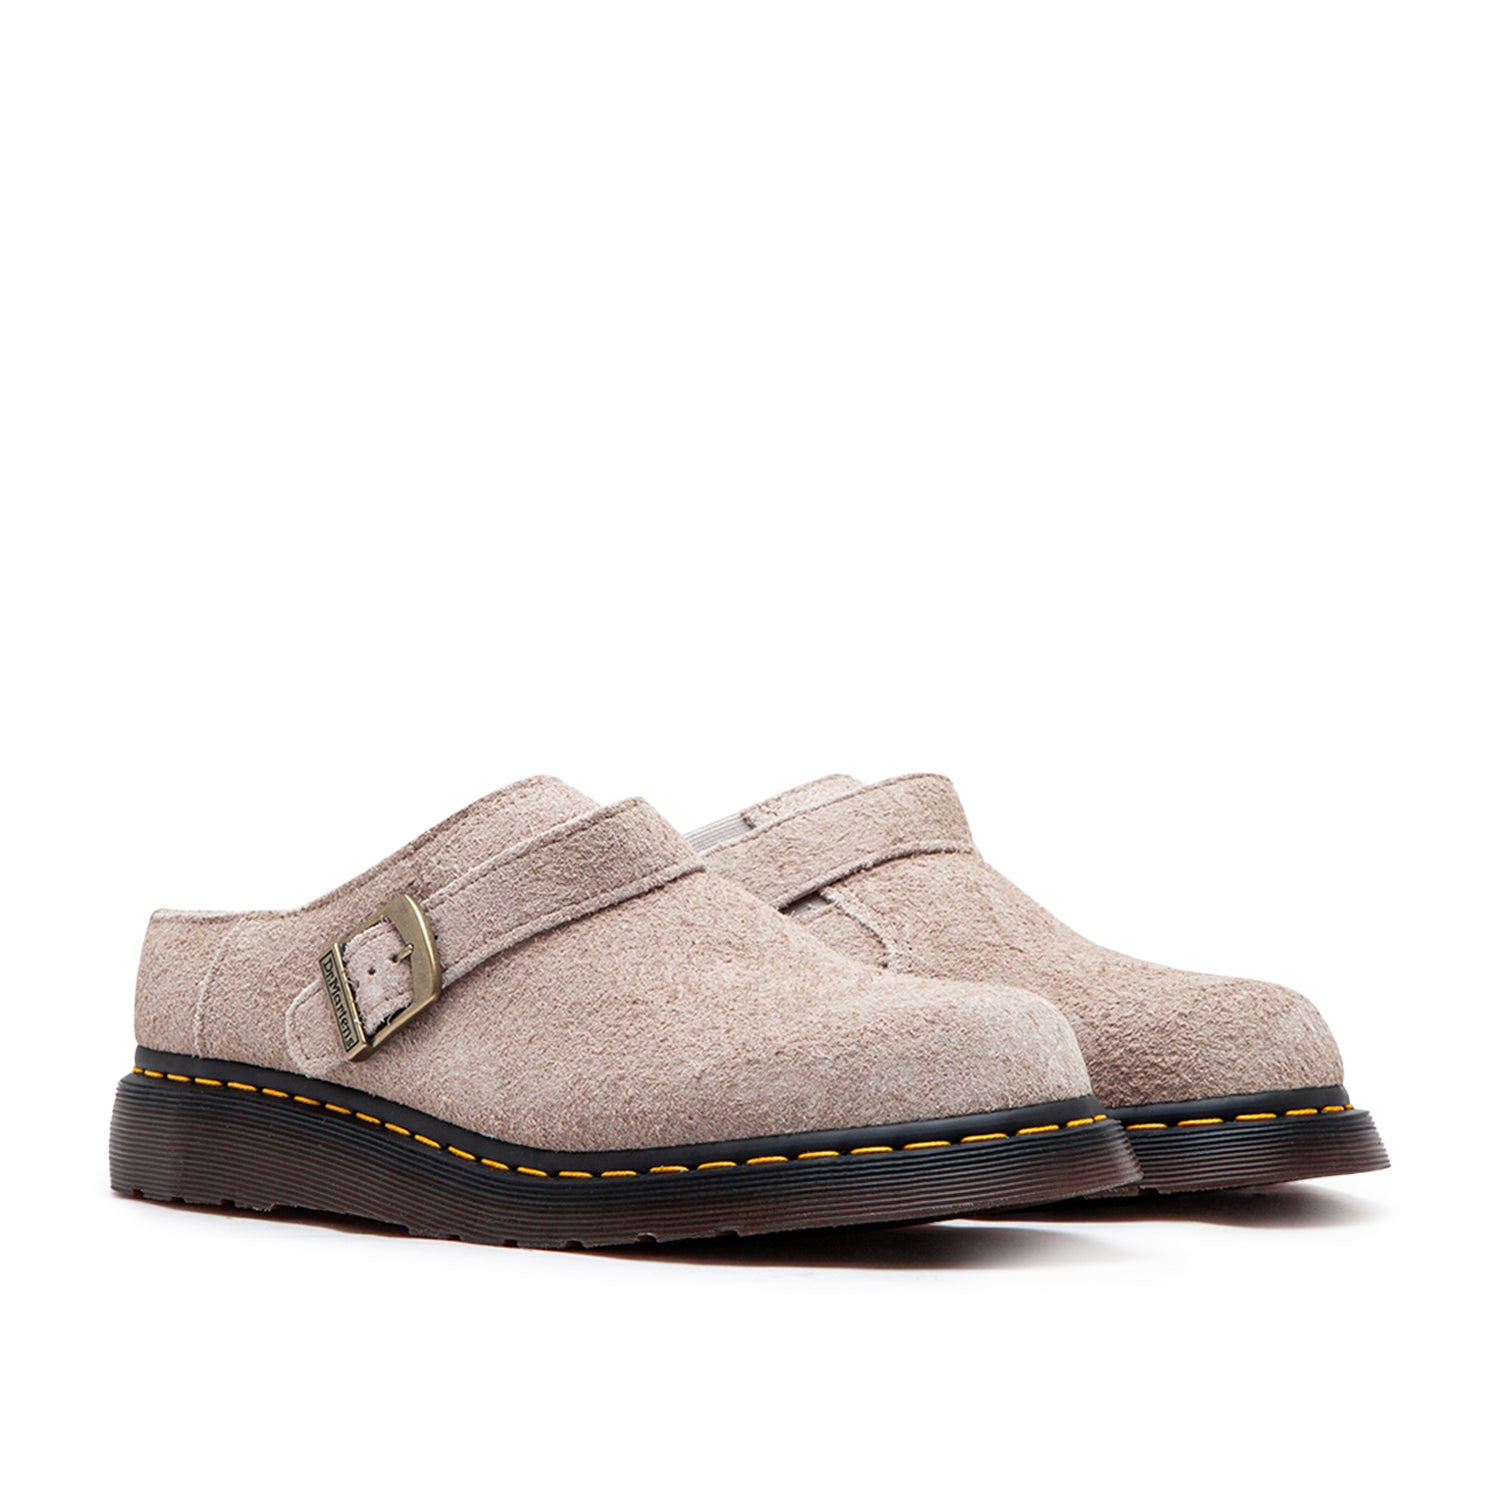 Dr. Martens Isham Faux Shearling Lined Suede Mules (Beige)  - Allike Store